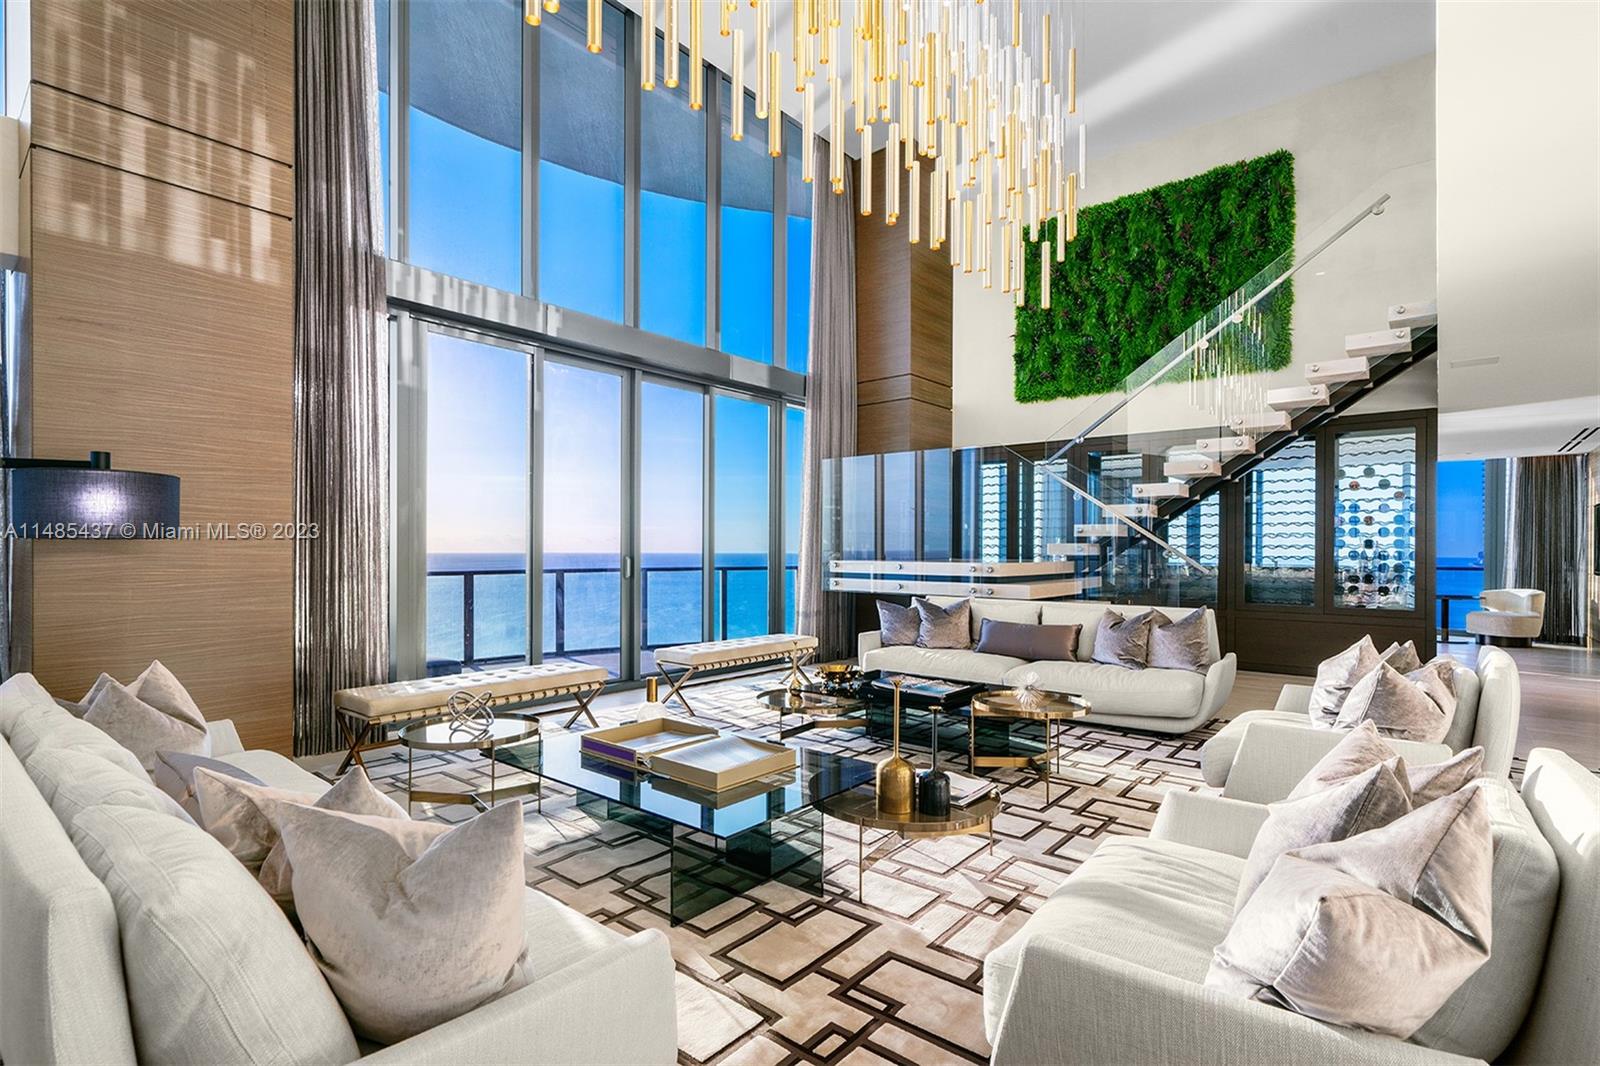 Introducing the Regalia Penthouse, a masterpiece offering limited edition living on the Ocean in Sunny Isles Beach. Encompassing 10,755 SF of living space, this residence is furnished with the world&#039;s finest materials where quality &amp; style define the interiors. With a private pool &amp; 2 levels of unobstructed panoramic views, including the Atlantic Ocean, pristine beaches, Intracoastal Waterway &amp; Miami Beach skylines. This home in the sky features a stunning European kitchen with chef island &amp; Miele cooktop, a 500-bottle wine cellar, private movie theatre, and an all marble spa like expansive primary bathroom with two stunning showers and best in class finishes. Enjoy sunrise &amp; sunsets from this elegant residence, the last oceanfront parcel in Sunny Isles.